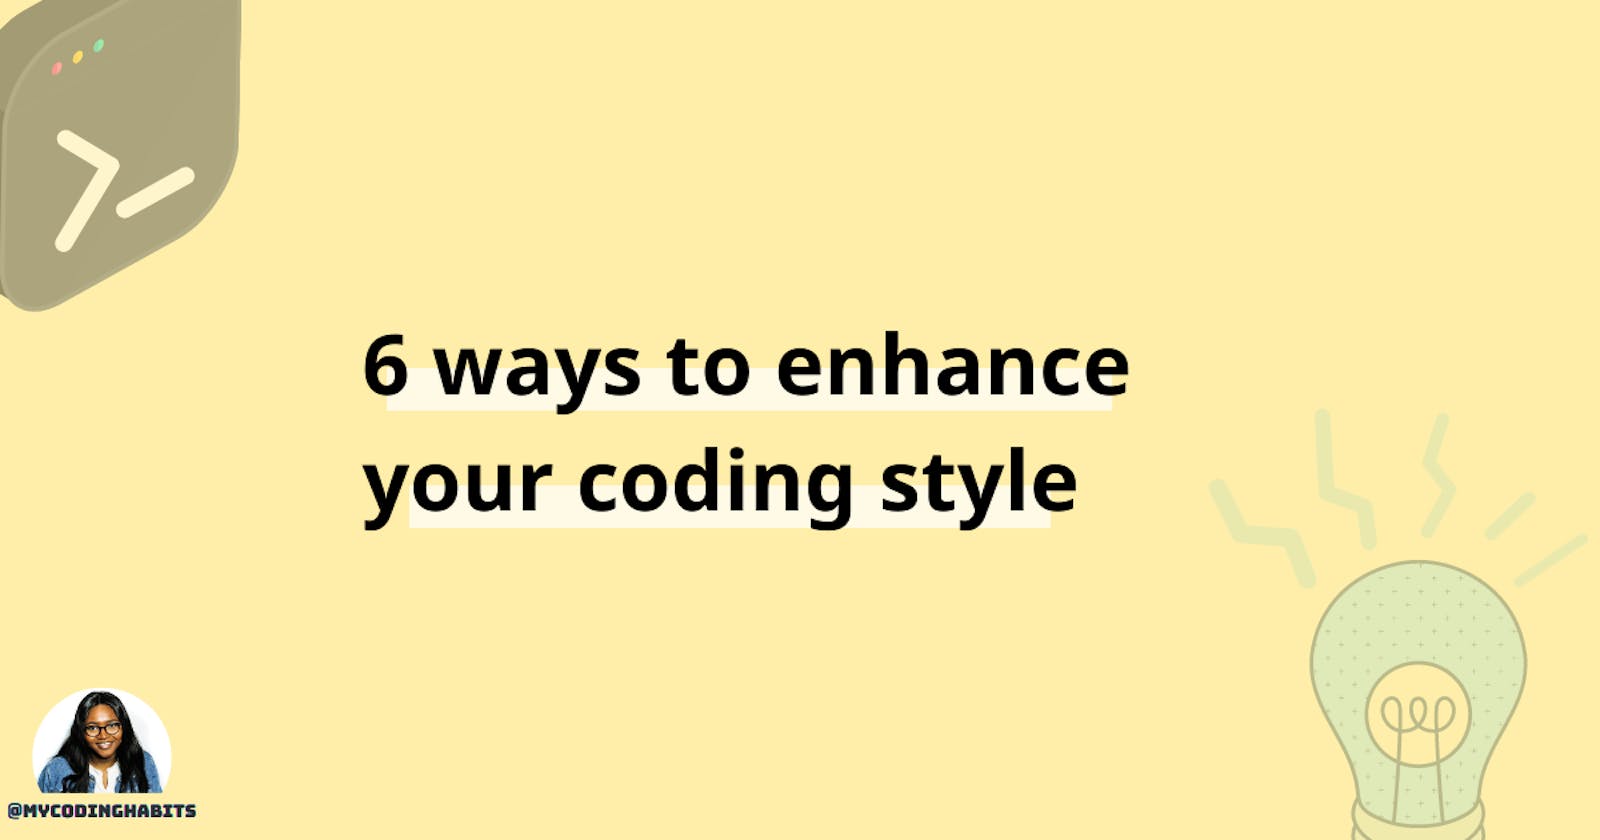 6 ways to improve your coding style